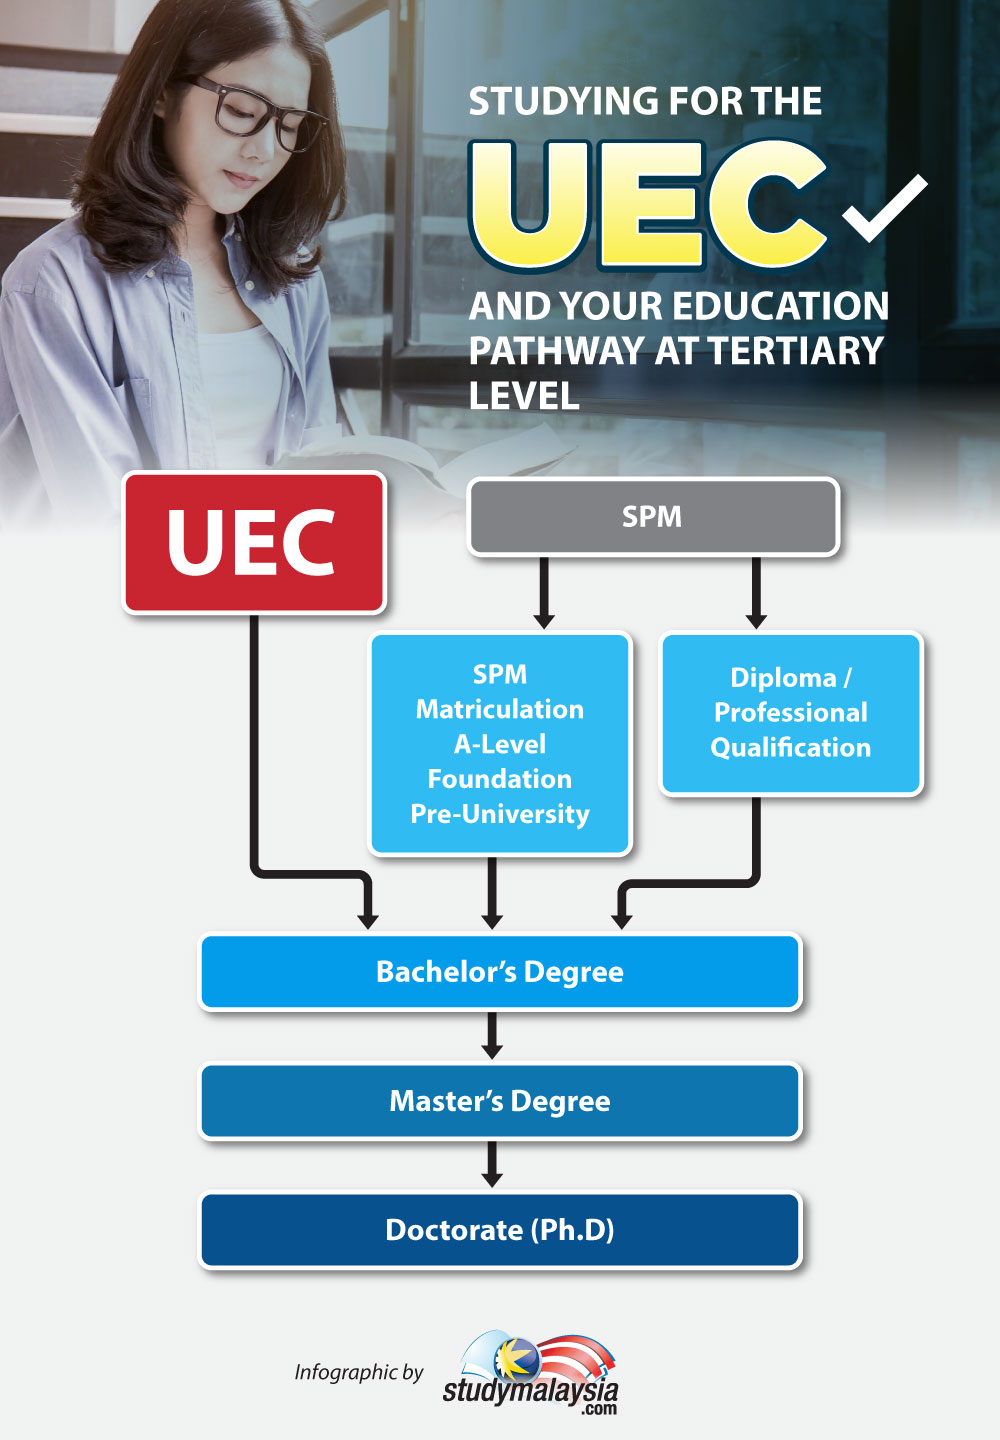 Studying for the UEC and your education pathway at tertiary level